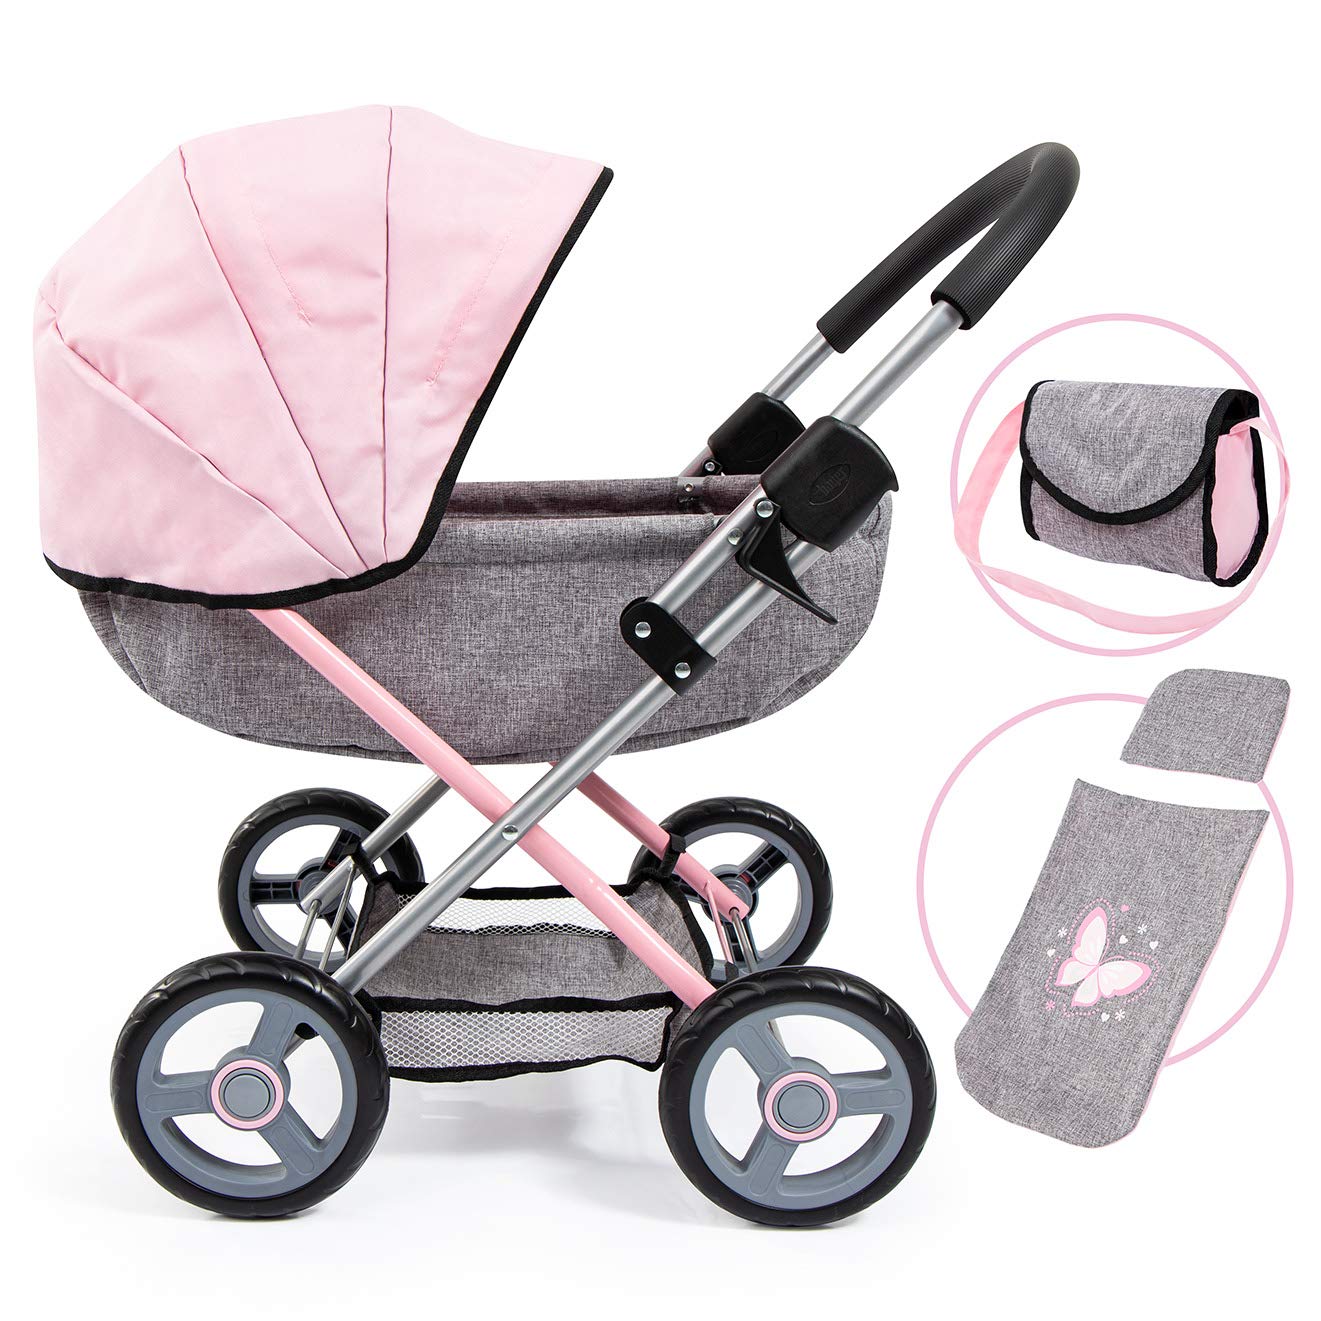 Bayer Dolls Pram Cosy Set 4 in 1 for Dolls up to 18